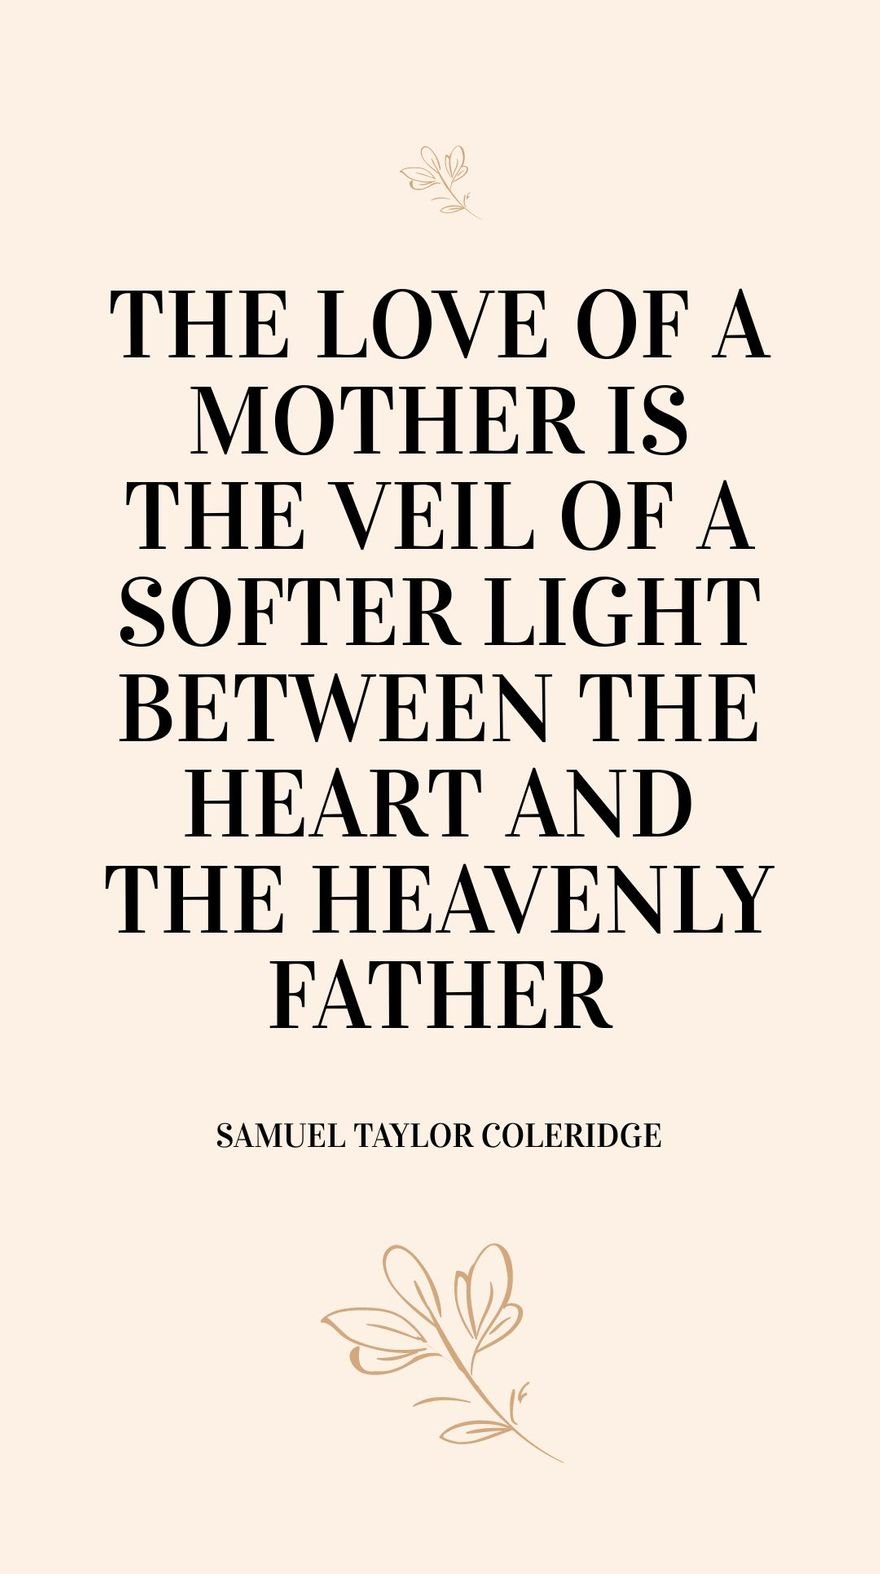 Free Samuel Taylor Coleridge - The love of a mother is the veil of a softer light between the heart and the heavenly Father. 